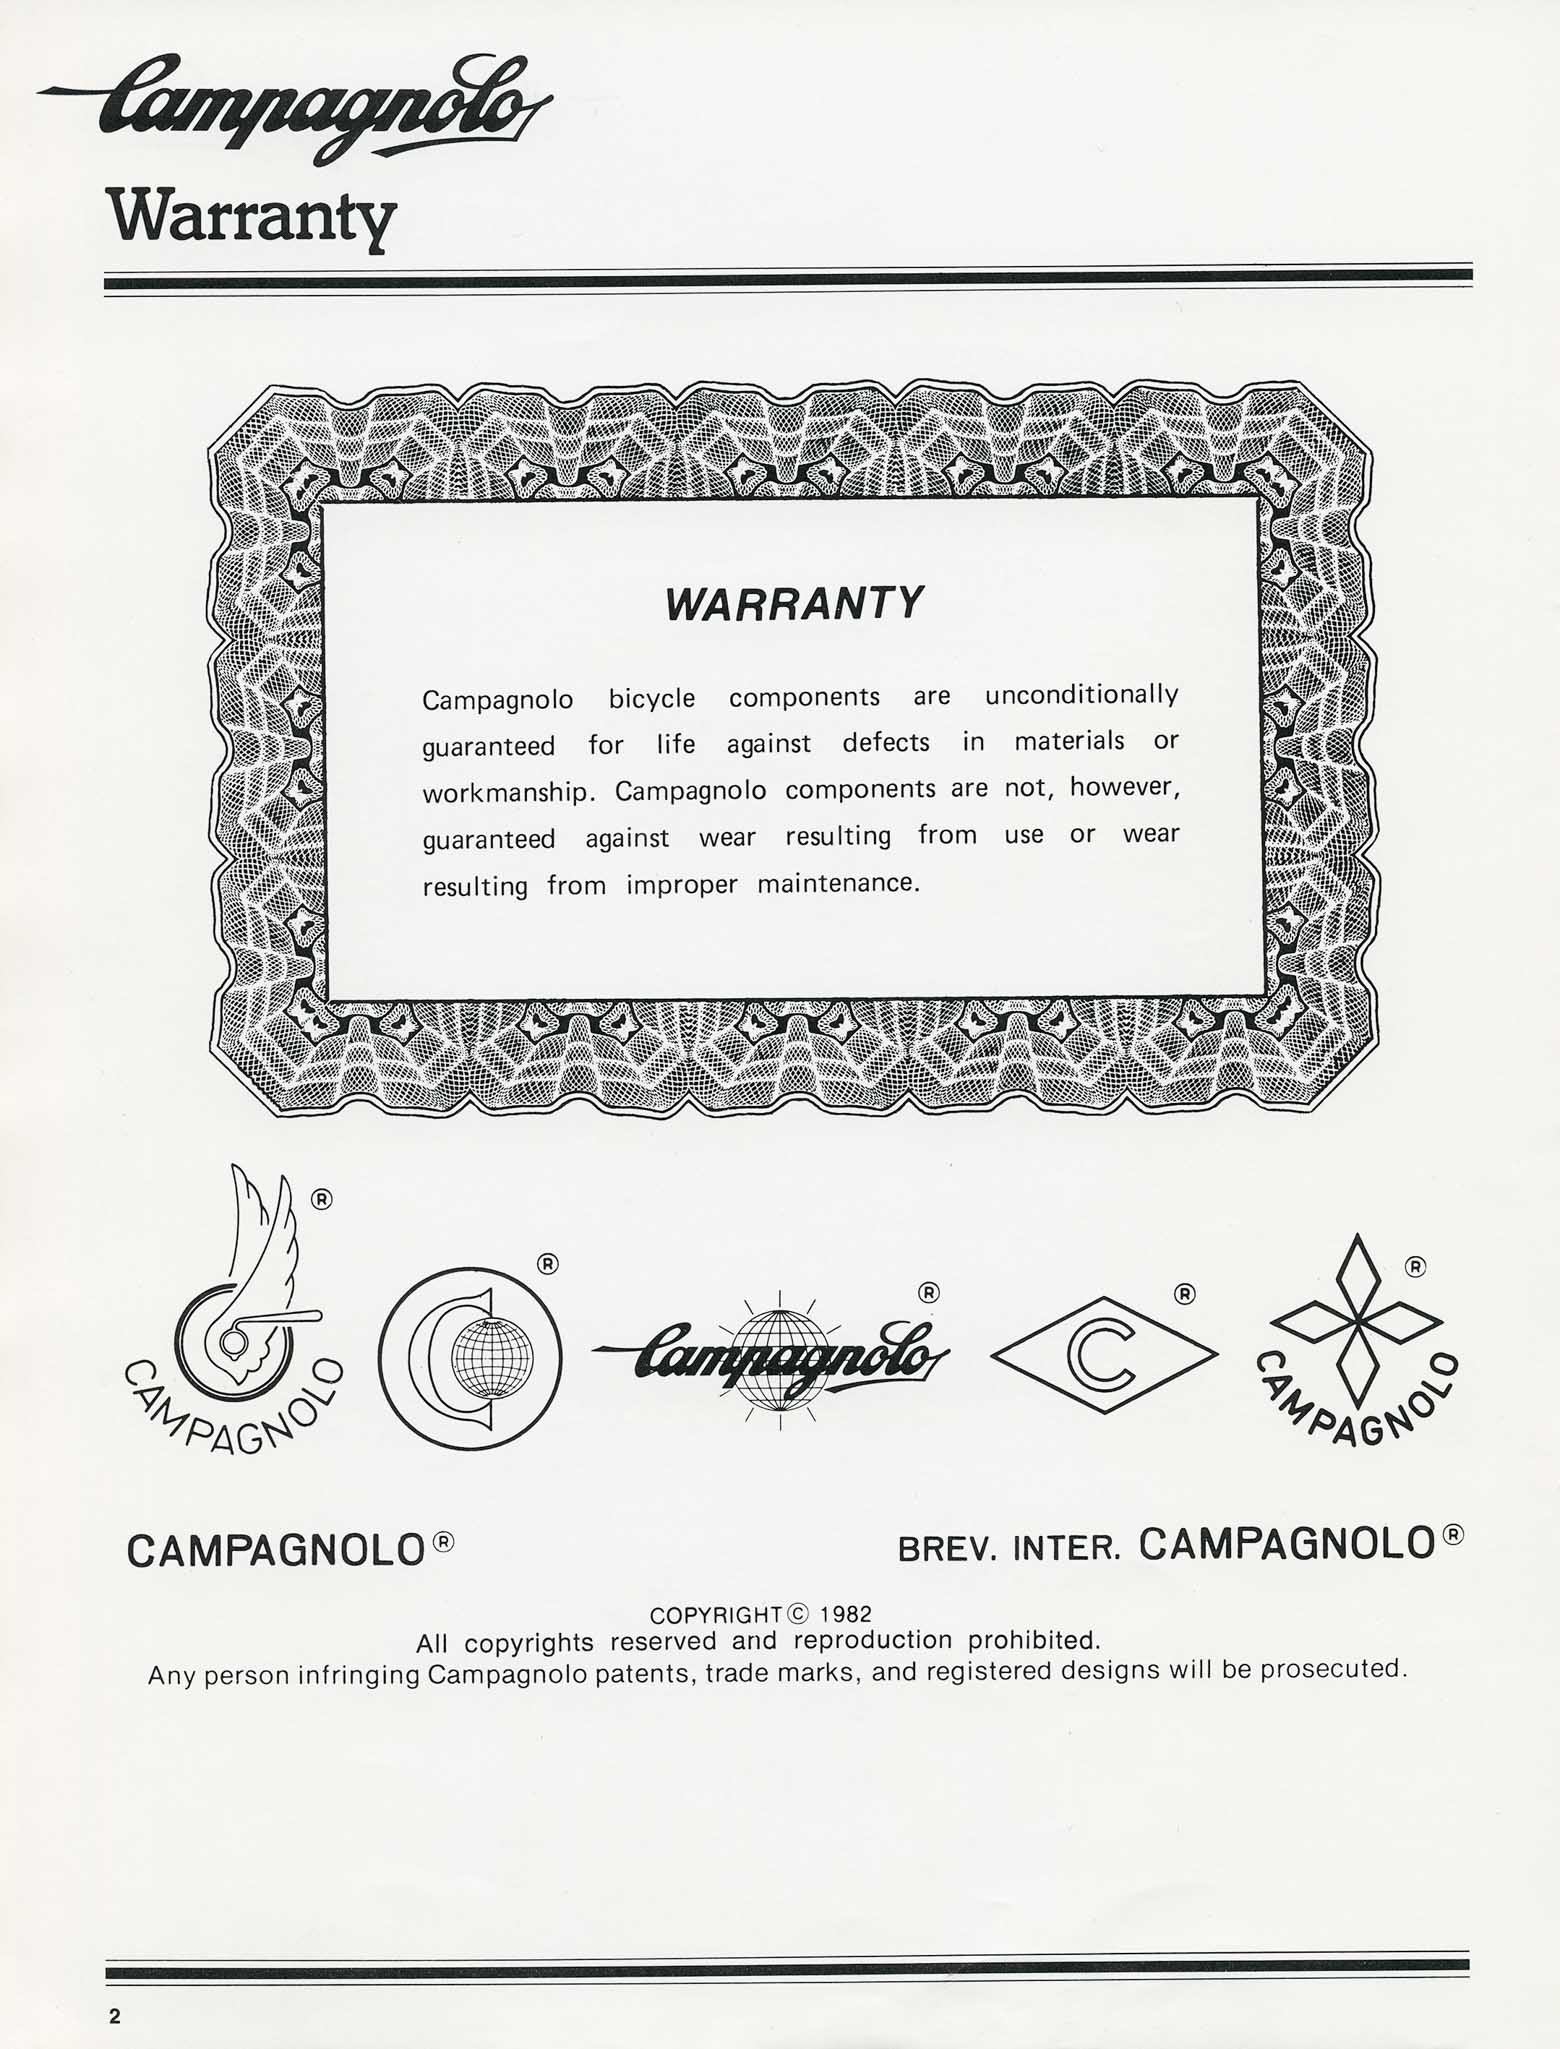 Campagnolo - Bicycle Components 1982 page 02 main image